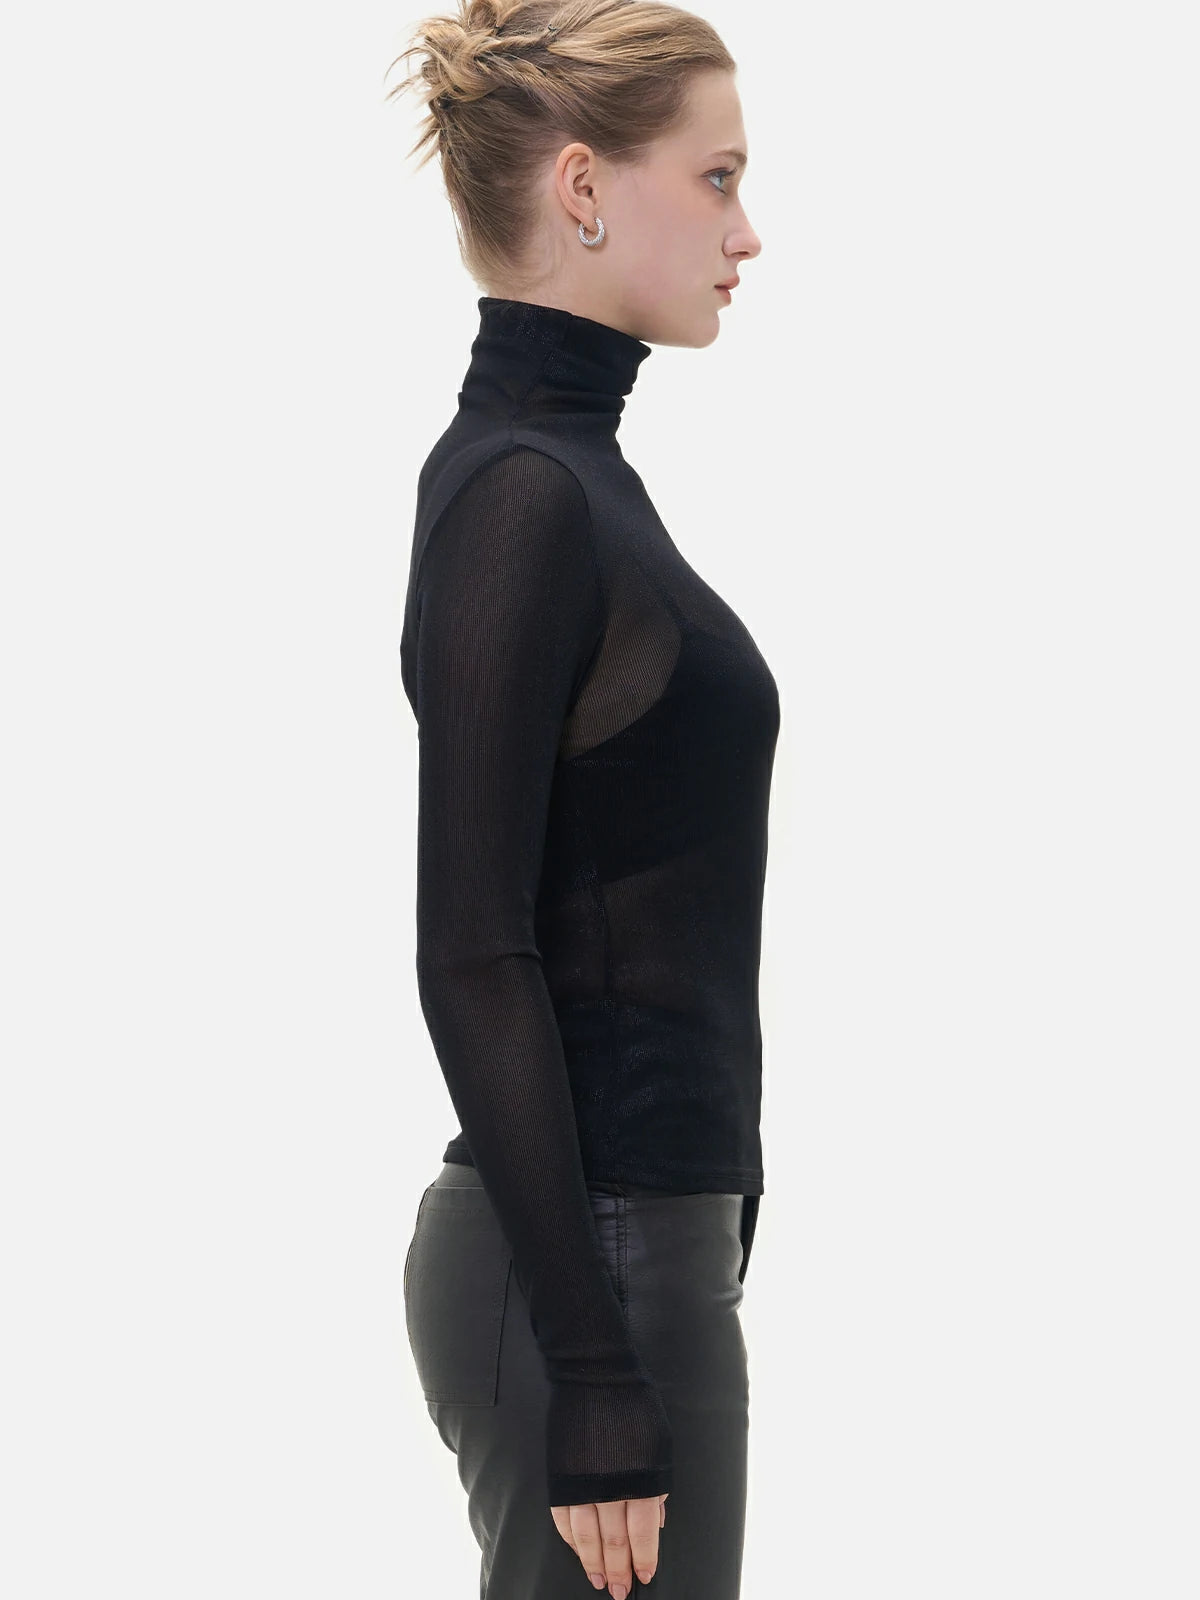 Embrace mysterious charm and sensual fashion with this slim-fit black sheer mesh top featuring a high-neck design.